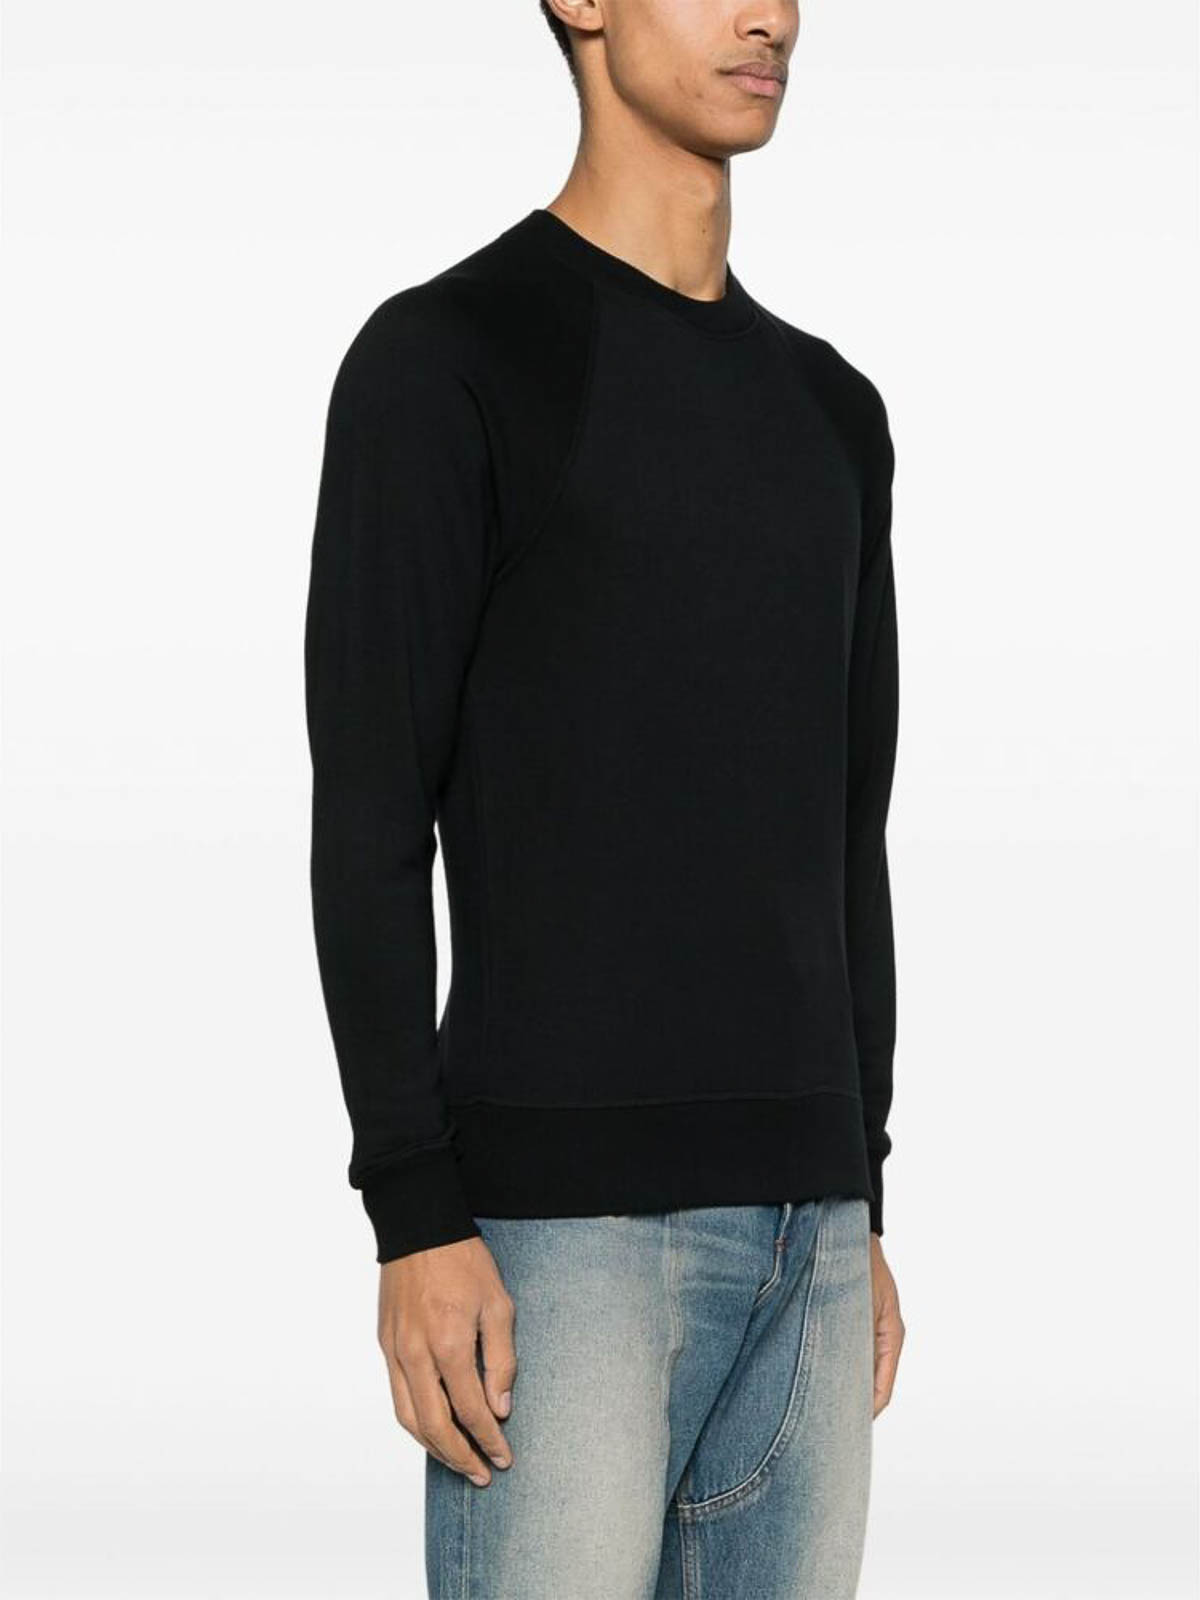 Shop Tom Ford Black Knit Crew Neck Sweater